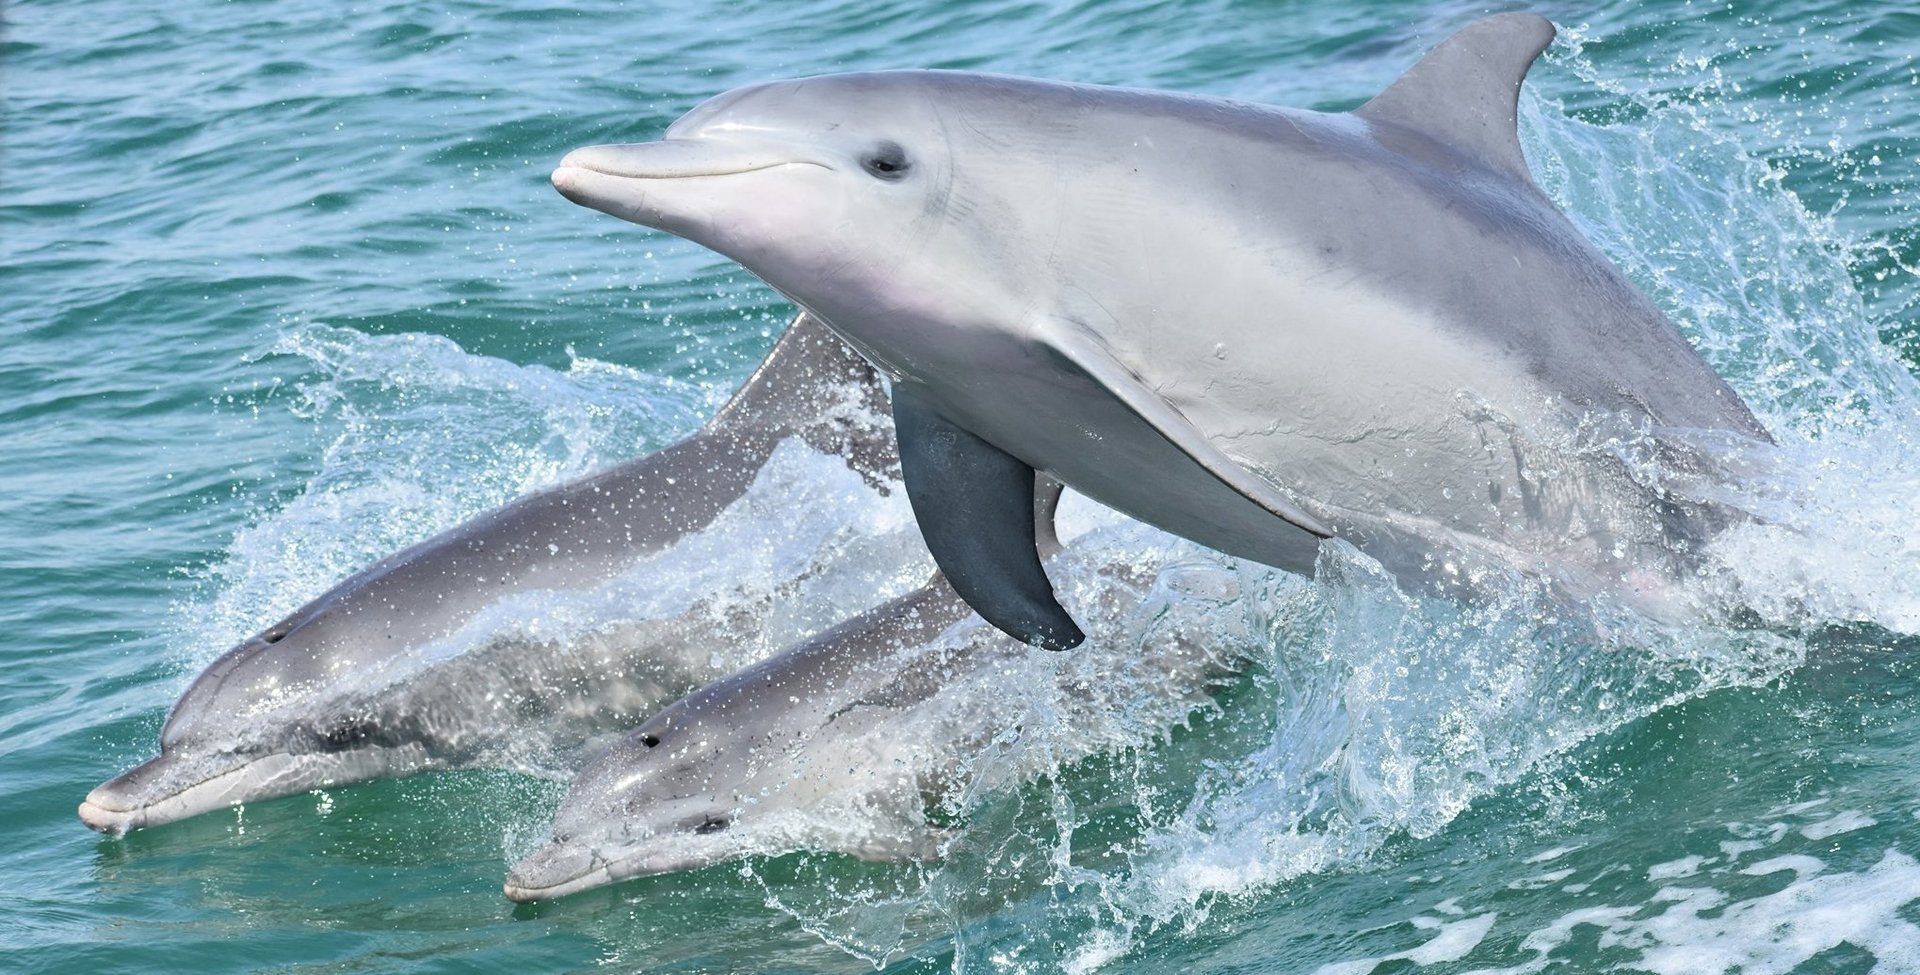 Three dolphins are swimming together. Two of the dolphins are on the surface of the water while the other one is jumping.